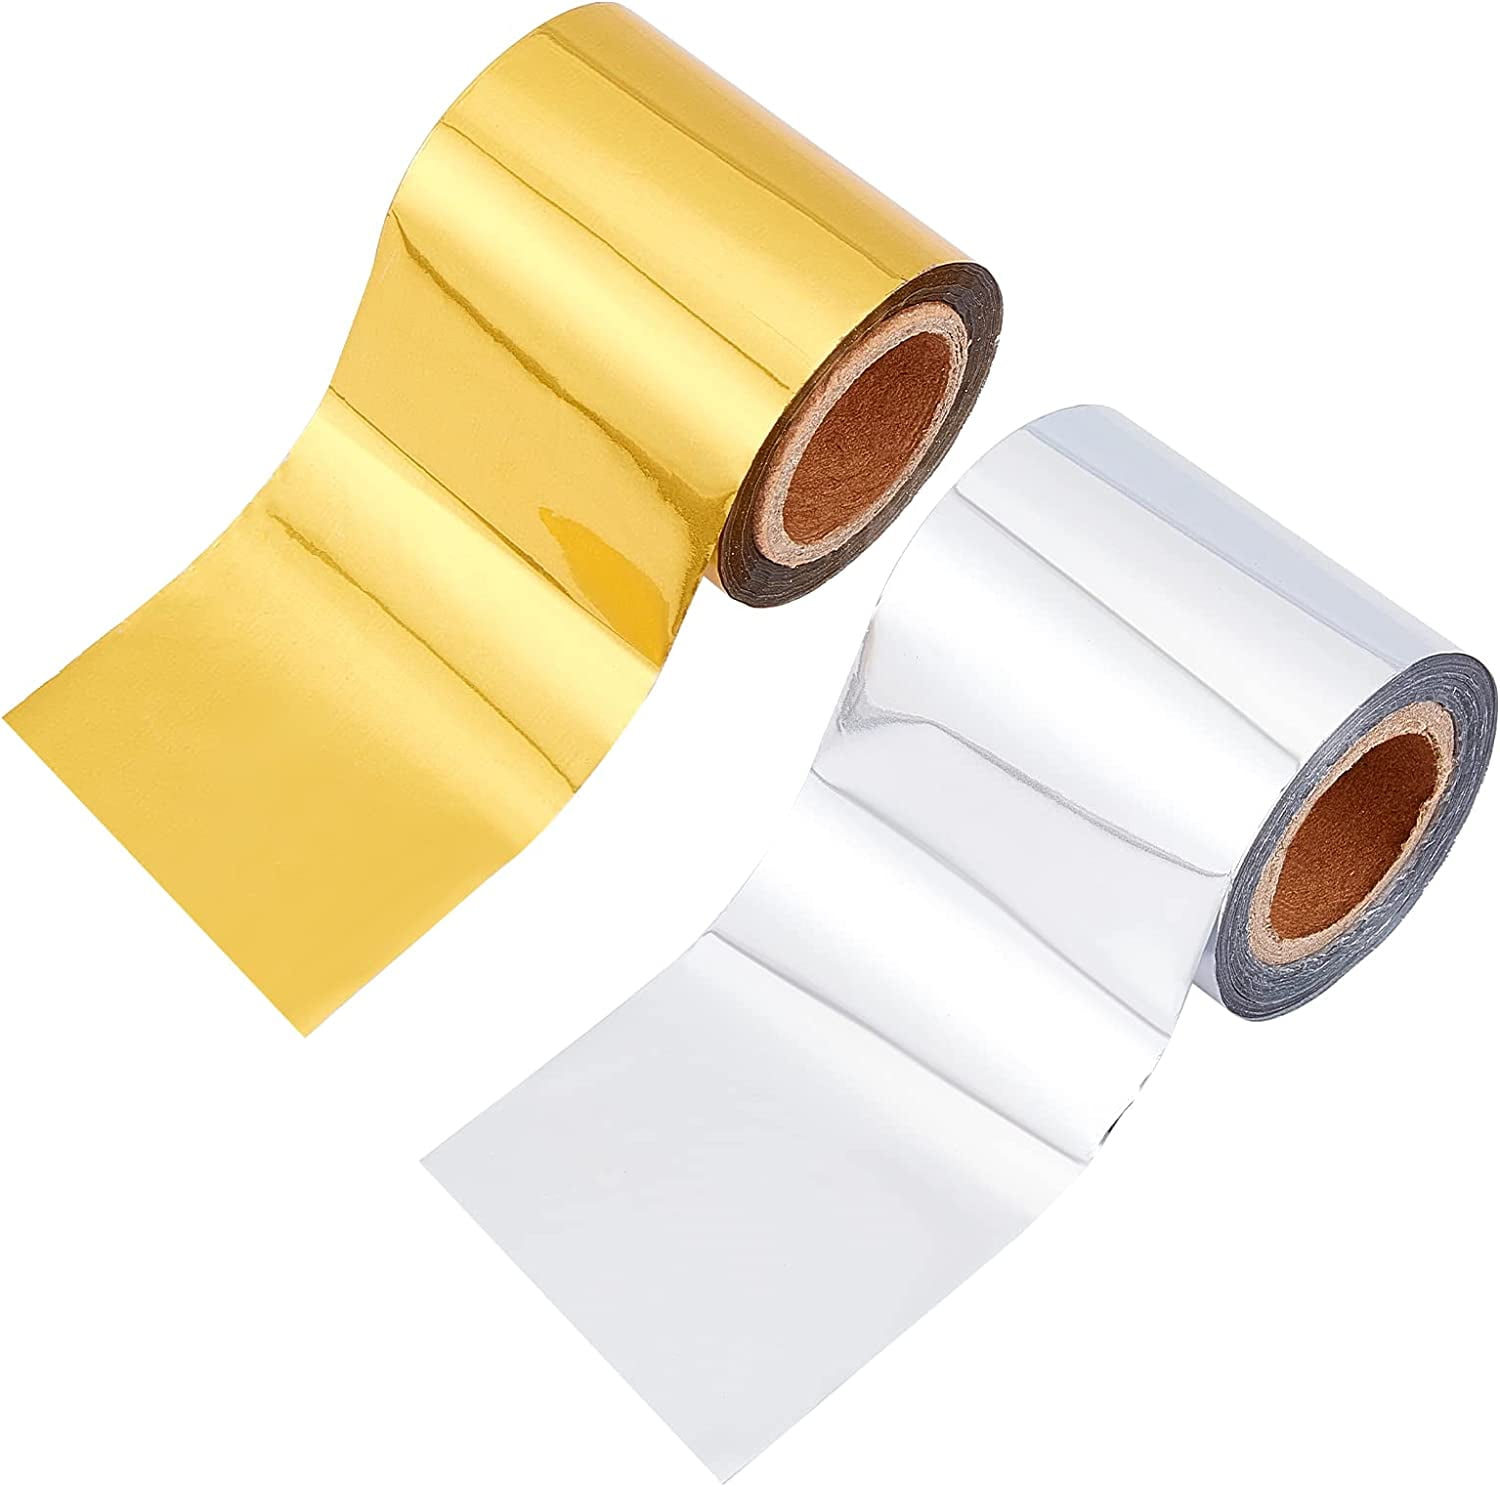 Saral Wax Free Transfer Paper - Red - 12 inches x 12 foot Roll 